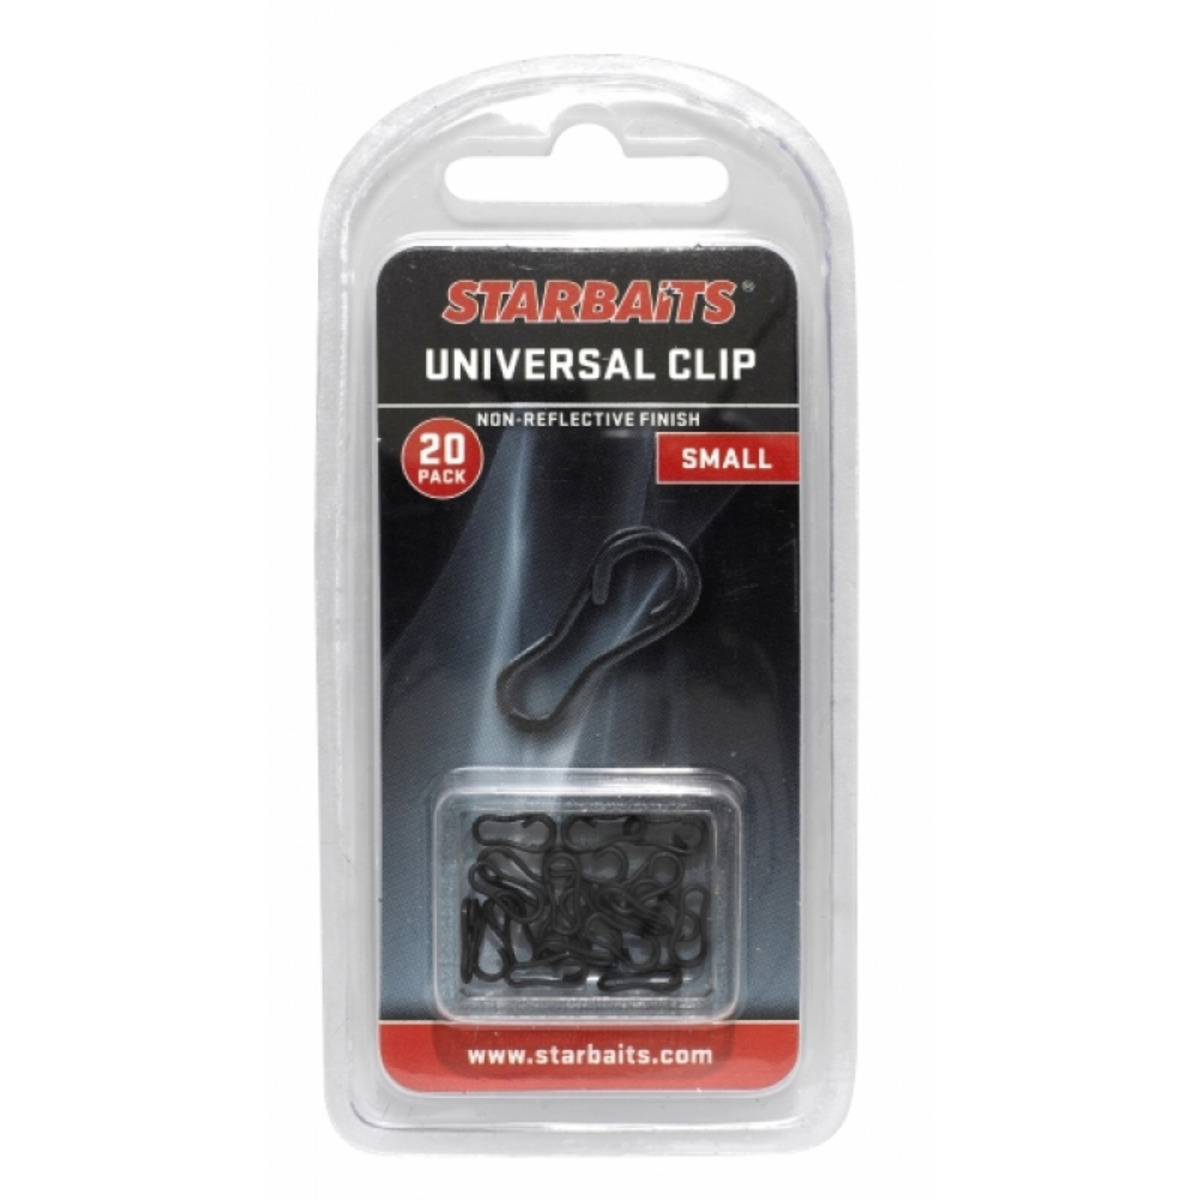 Starbaits Universal Clip - SMALL